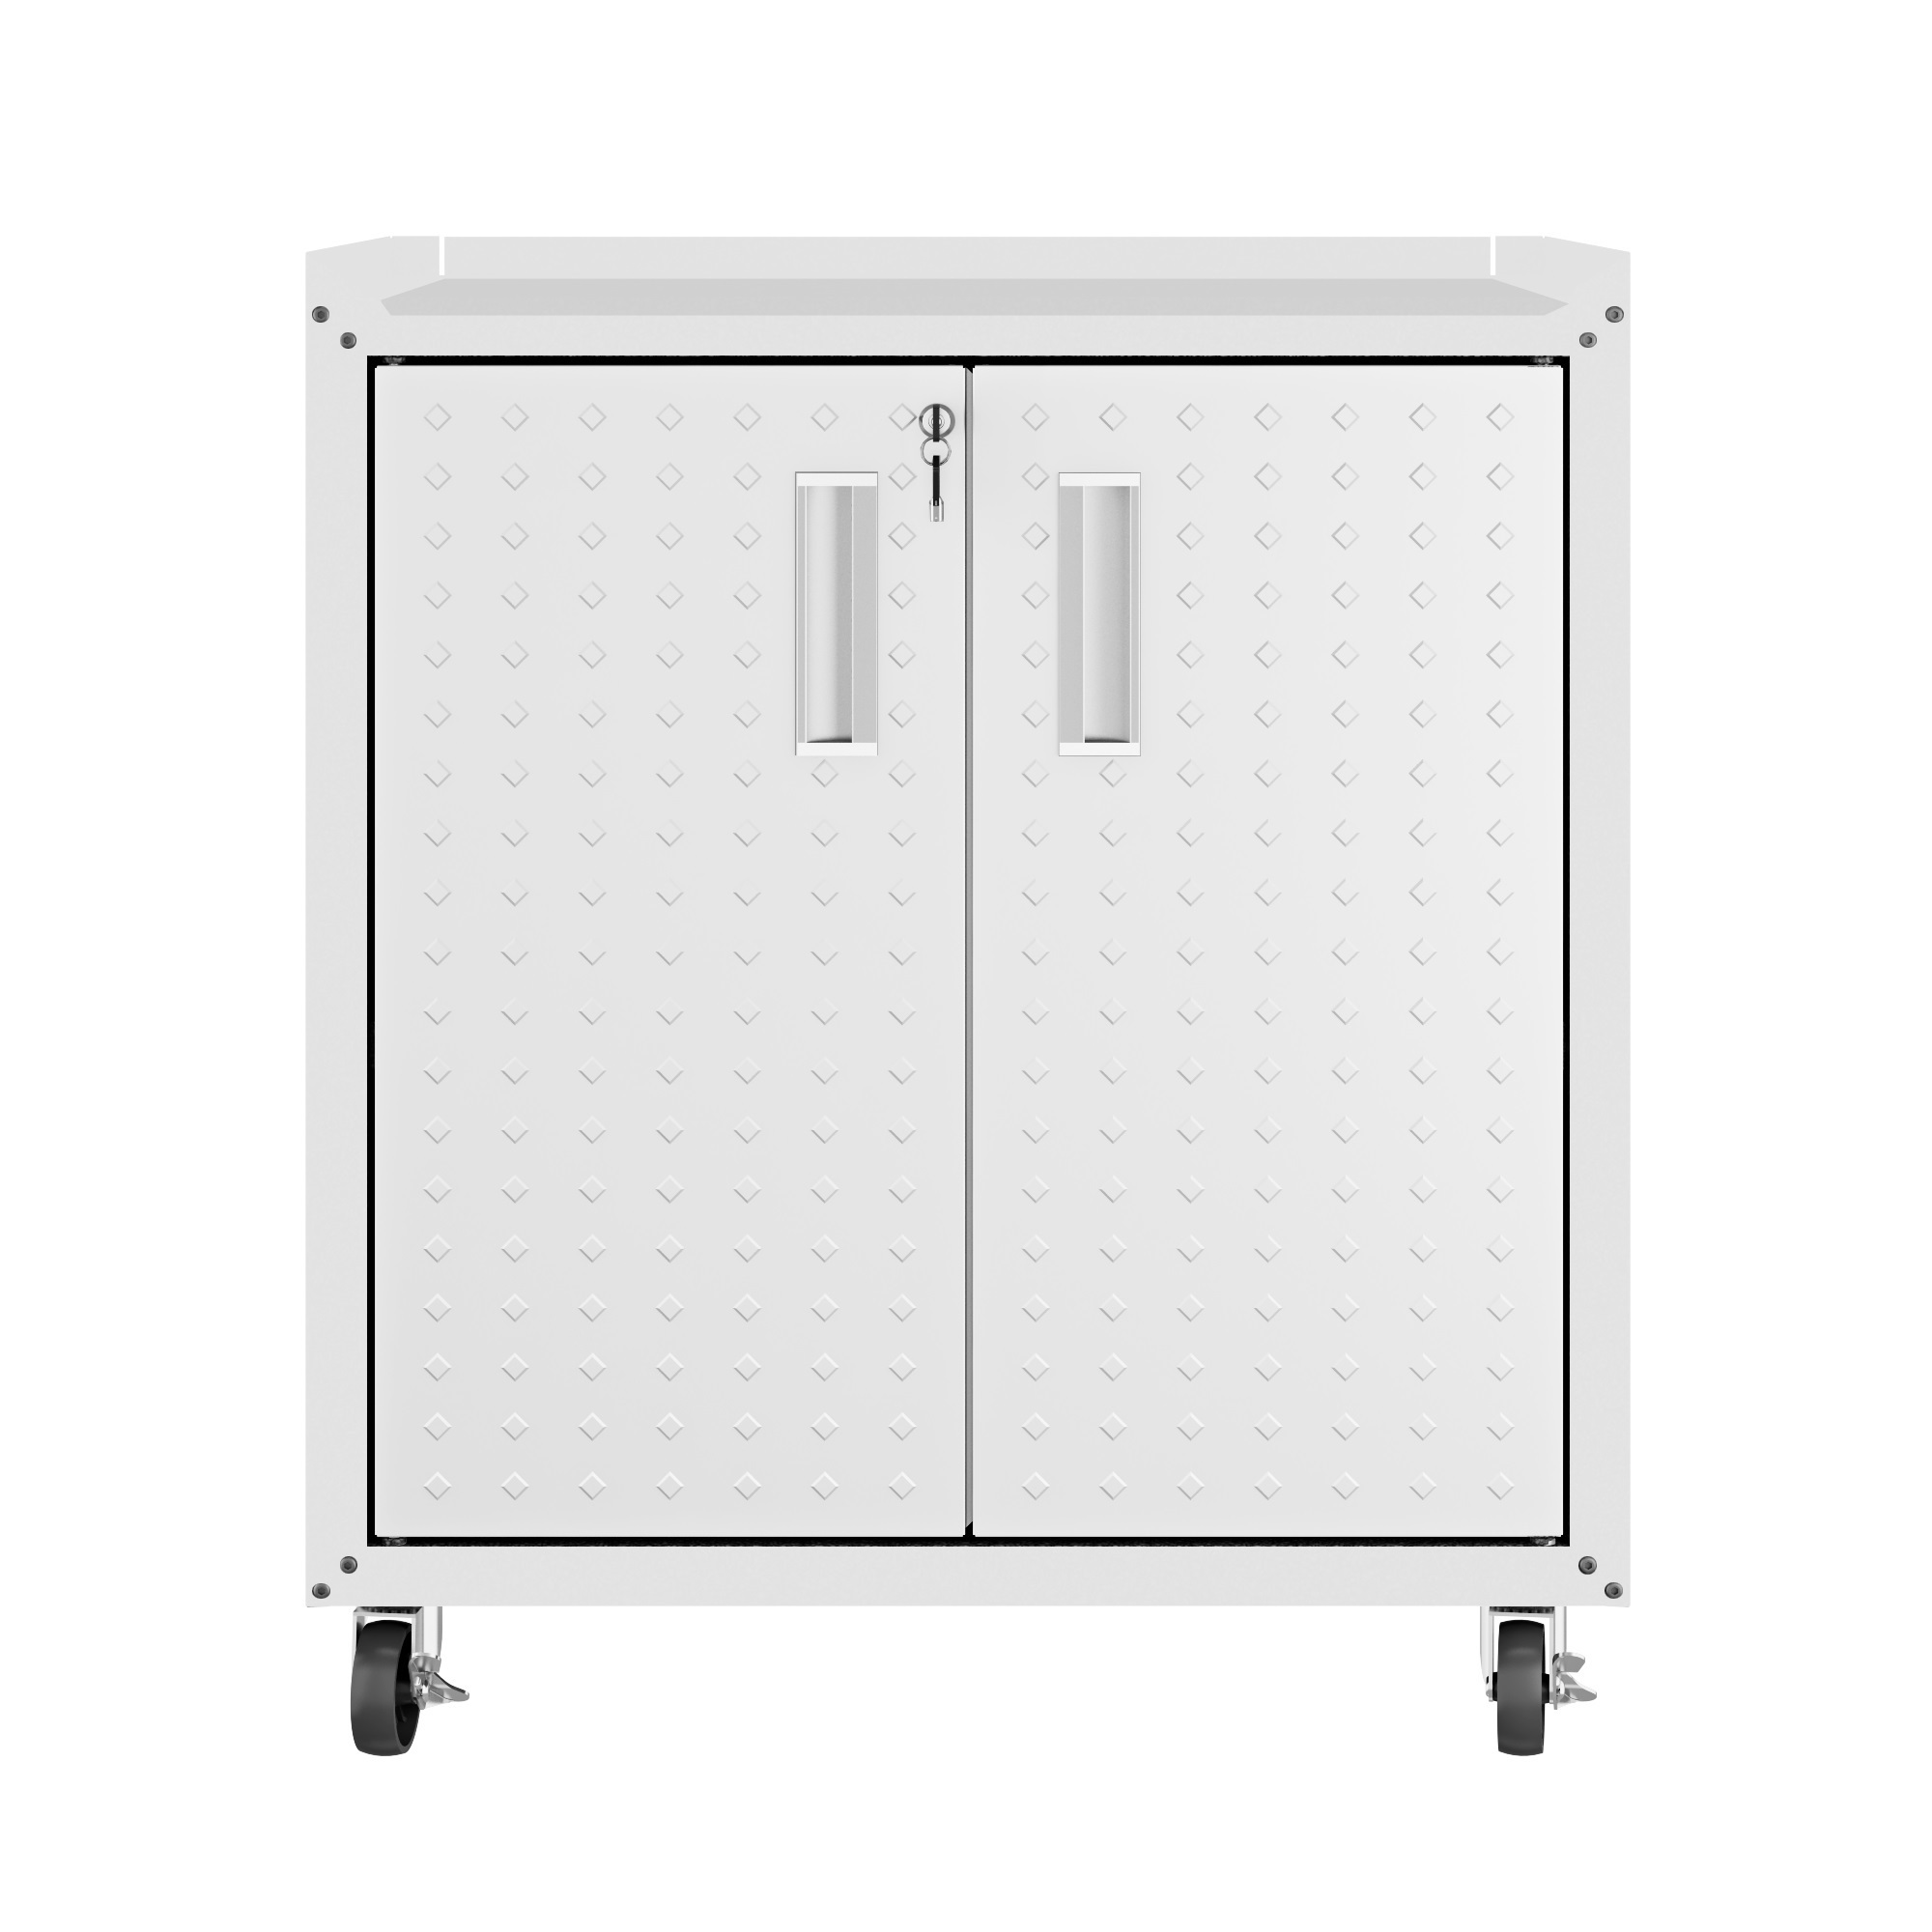 Manhattan Comfort, Fortress Mobile Garage Shelf Cabinet in White, Height 31.5 in, Width 30.3 in, Color White, Model 3GMCC